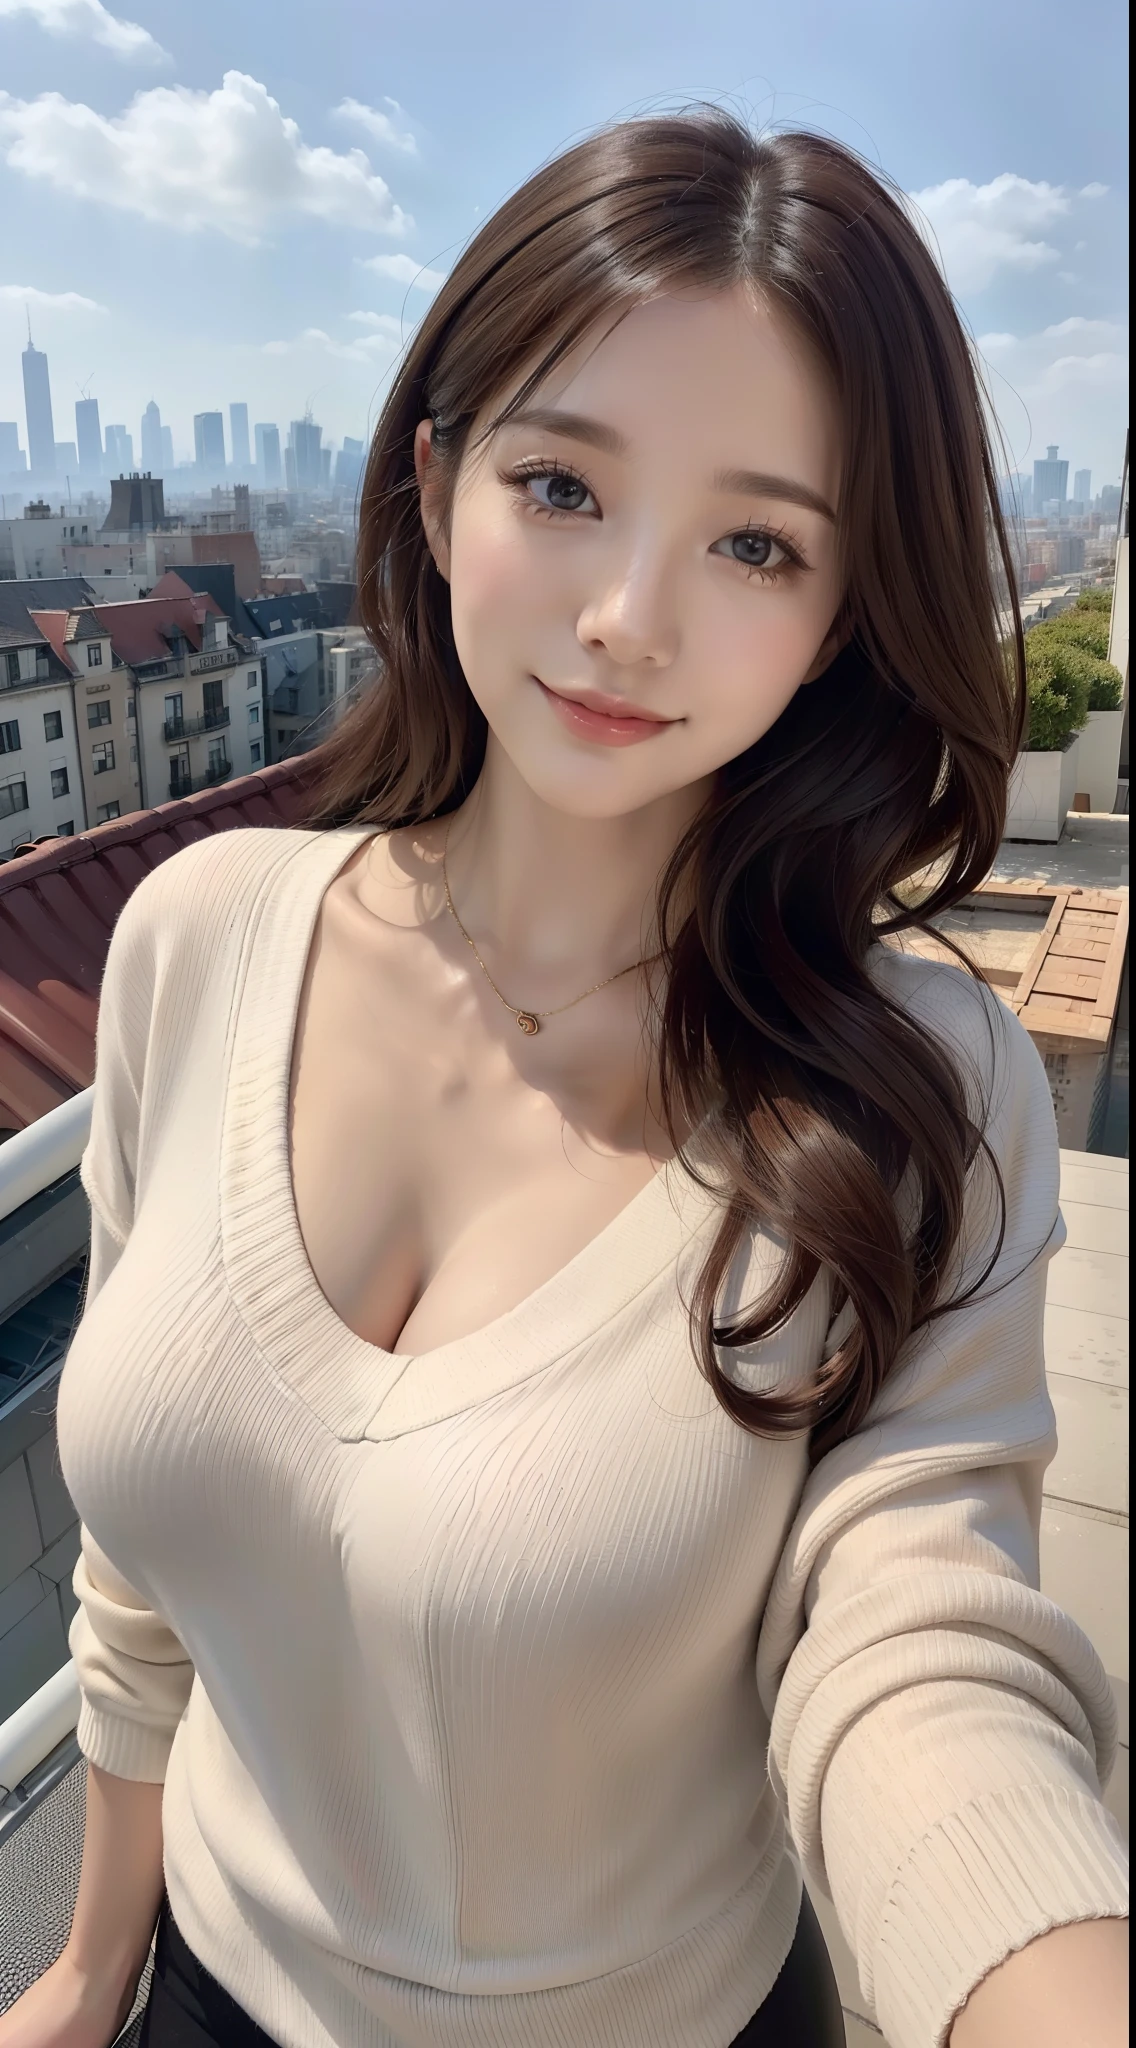 ((top-quality、8K、​masterpiece:1.3))、voluptuous woman、1girl in、(Slender figure:1.2)、dark brown  hair、hyperdetailed face、Detailed lips、A detailed eye、double eyelid、(huge-breasted:1.2)、Random T-shirt、Random attire、random place、、Plain clothe、Dressing、（ssmile:1.4）、(Rooftop City View:1.2)、Relaxing winter style with oversized sweaters and leggings